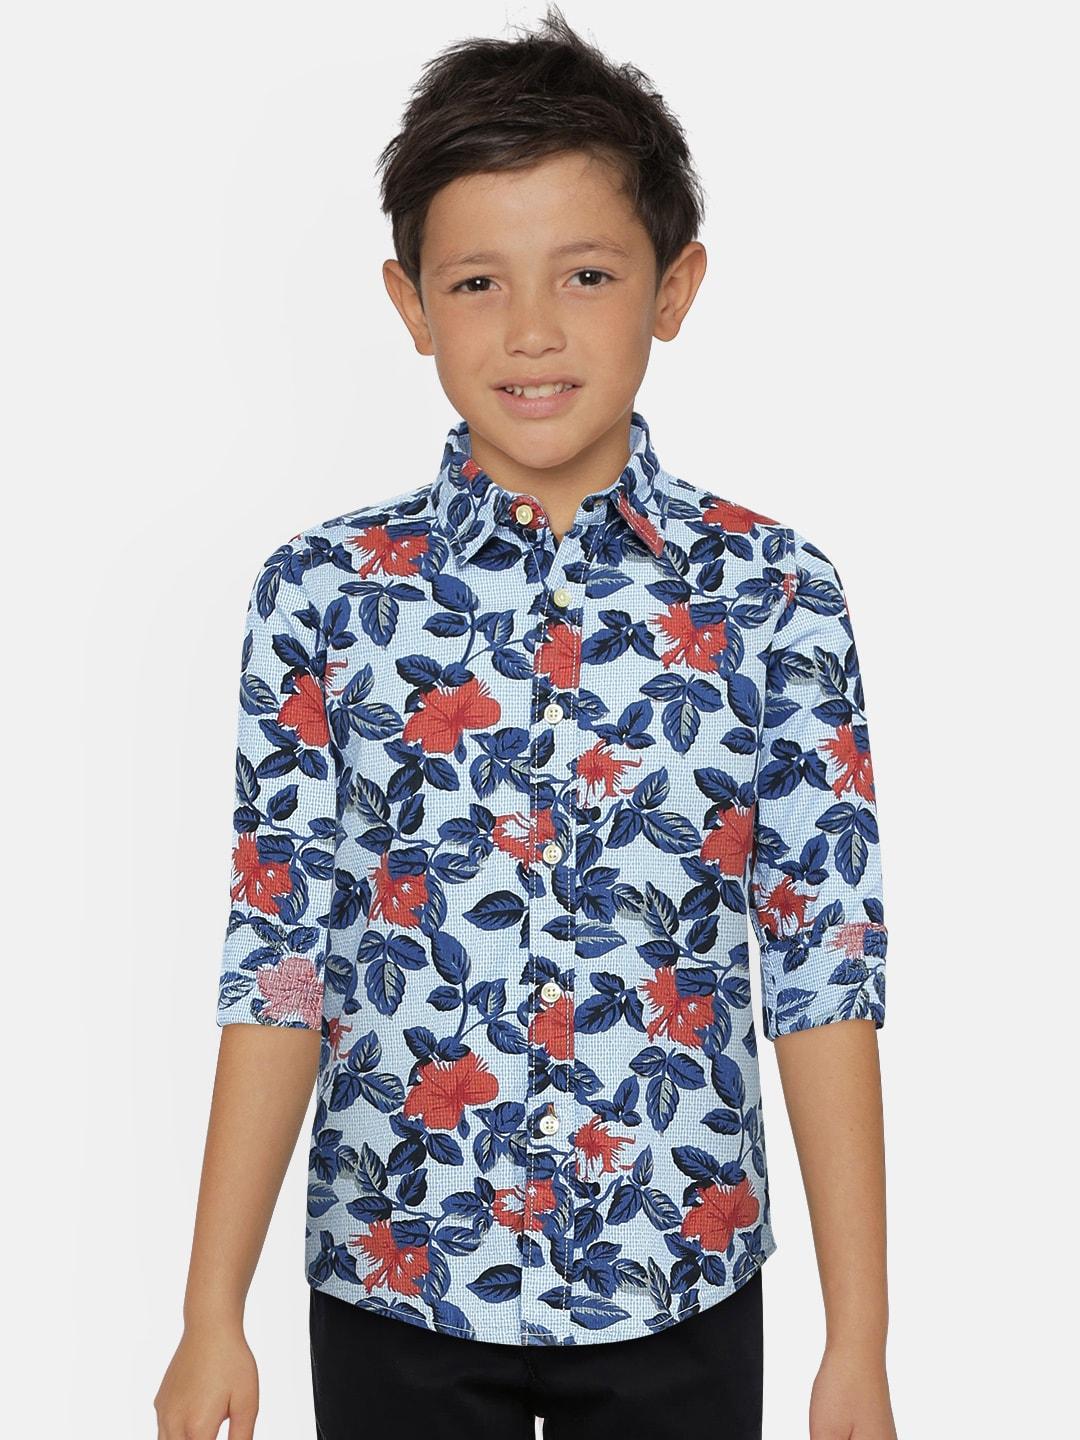 pepe jeans boys blue and red regular fit printed casual shirt